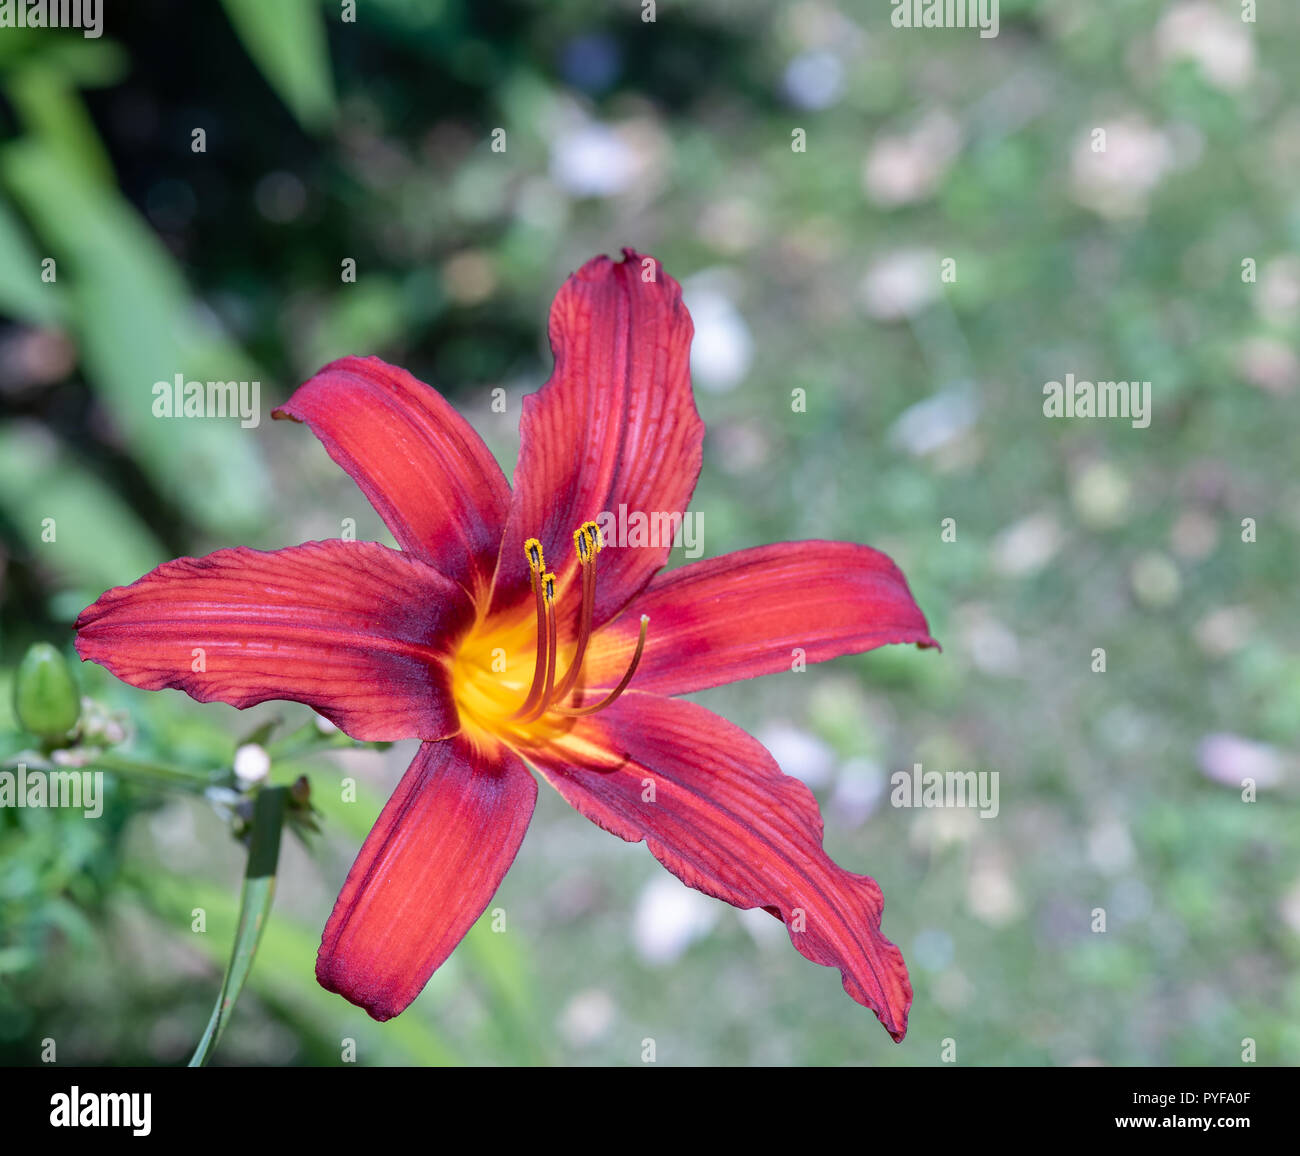 Colorful outdoor nature macro image of a blooming red yellow daylily blossom on a natural green blurred background taken on a bright sunny summer day Stock Photo